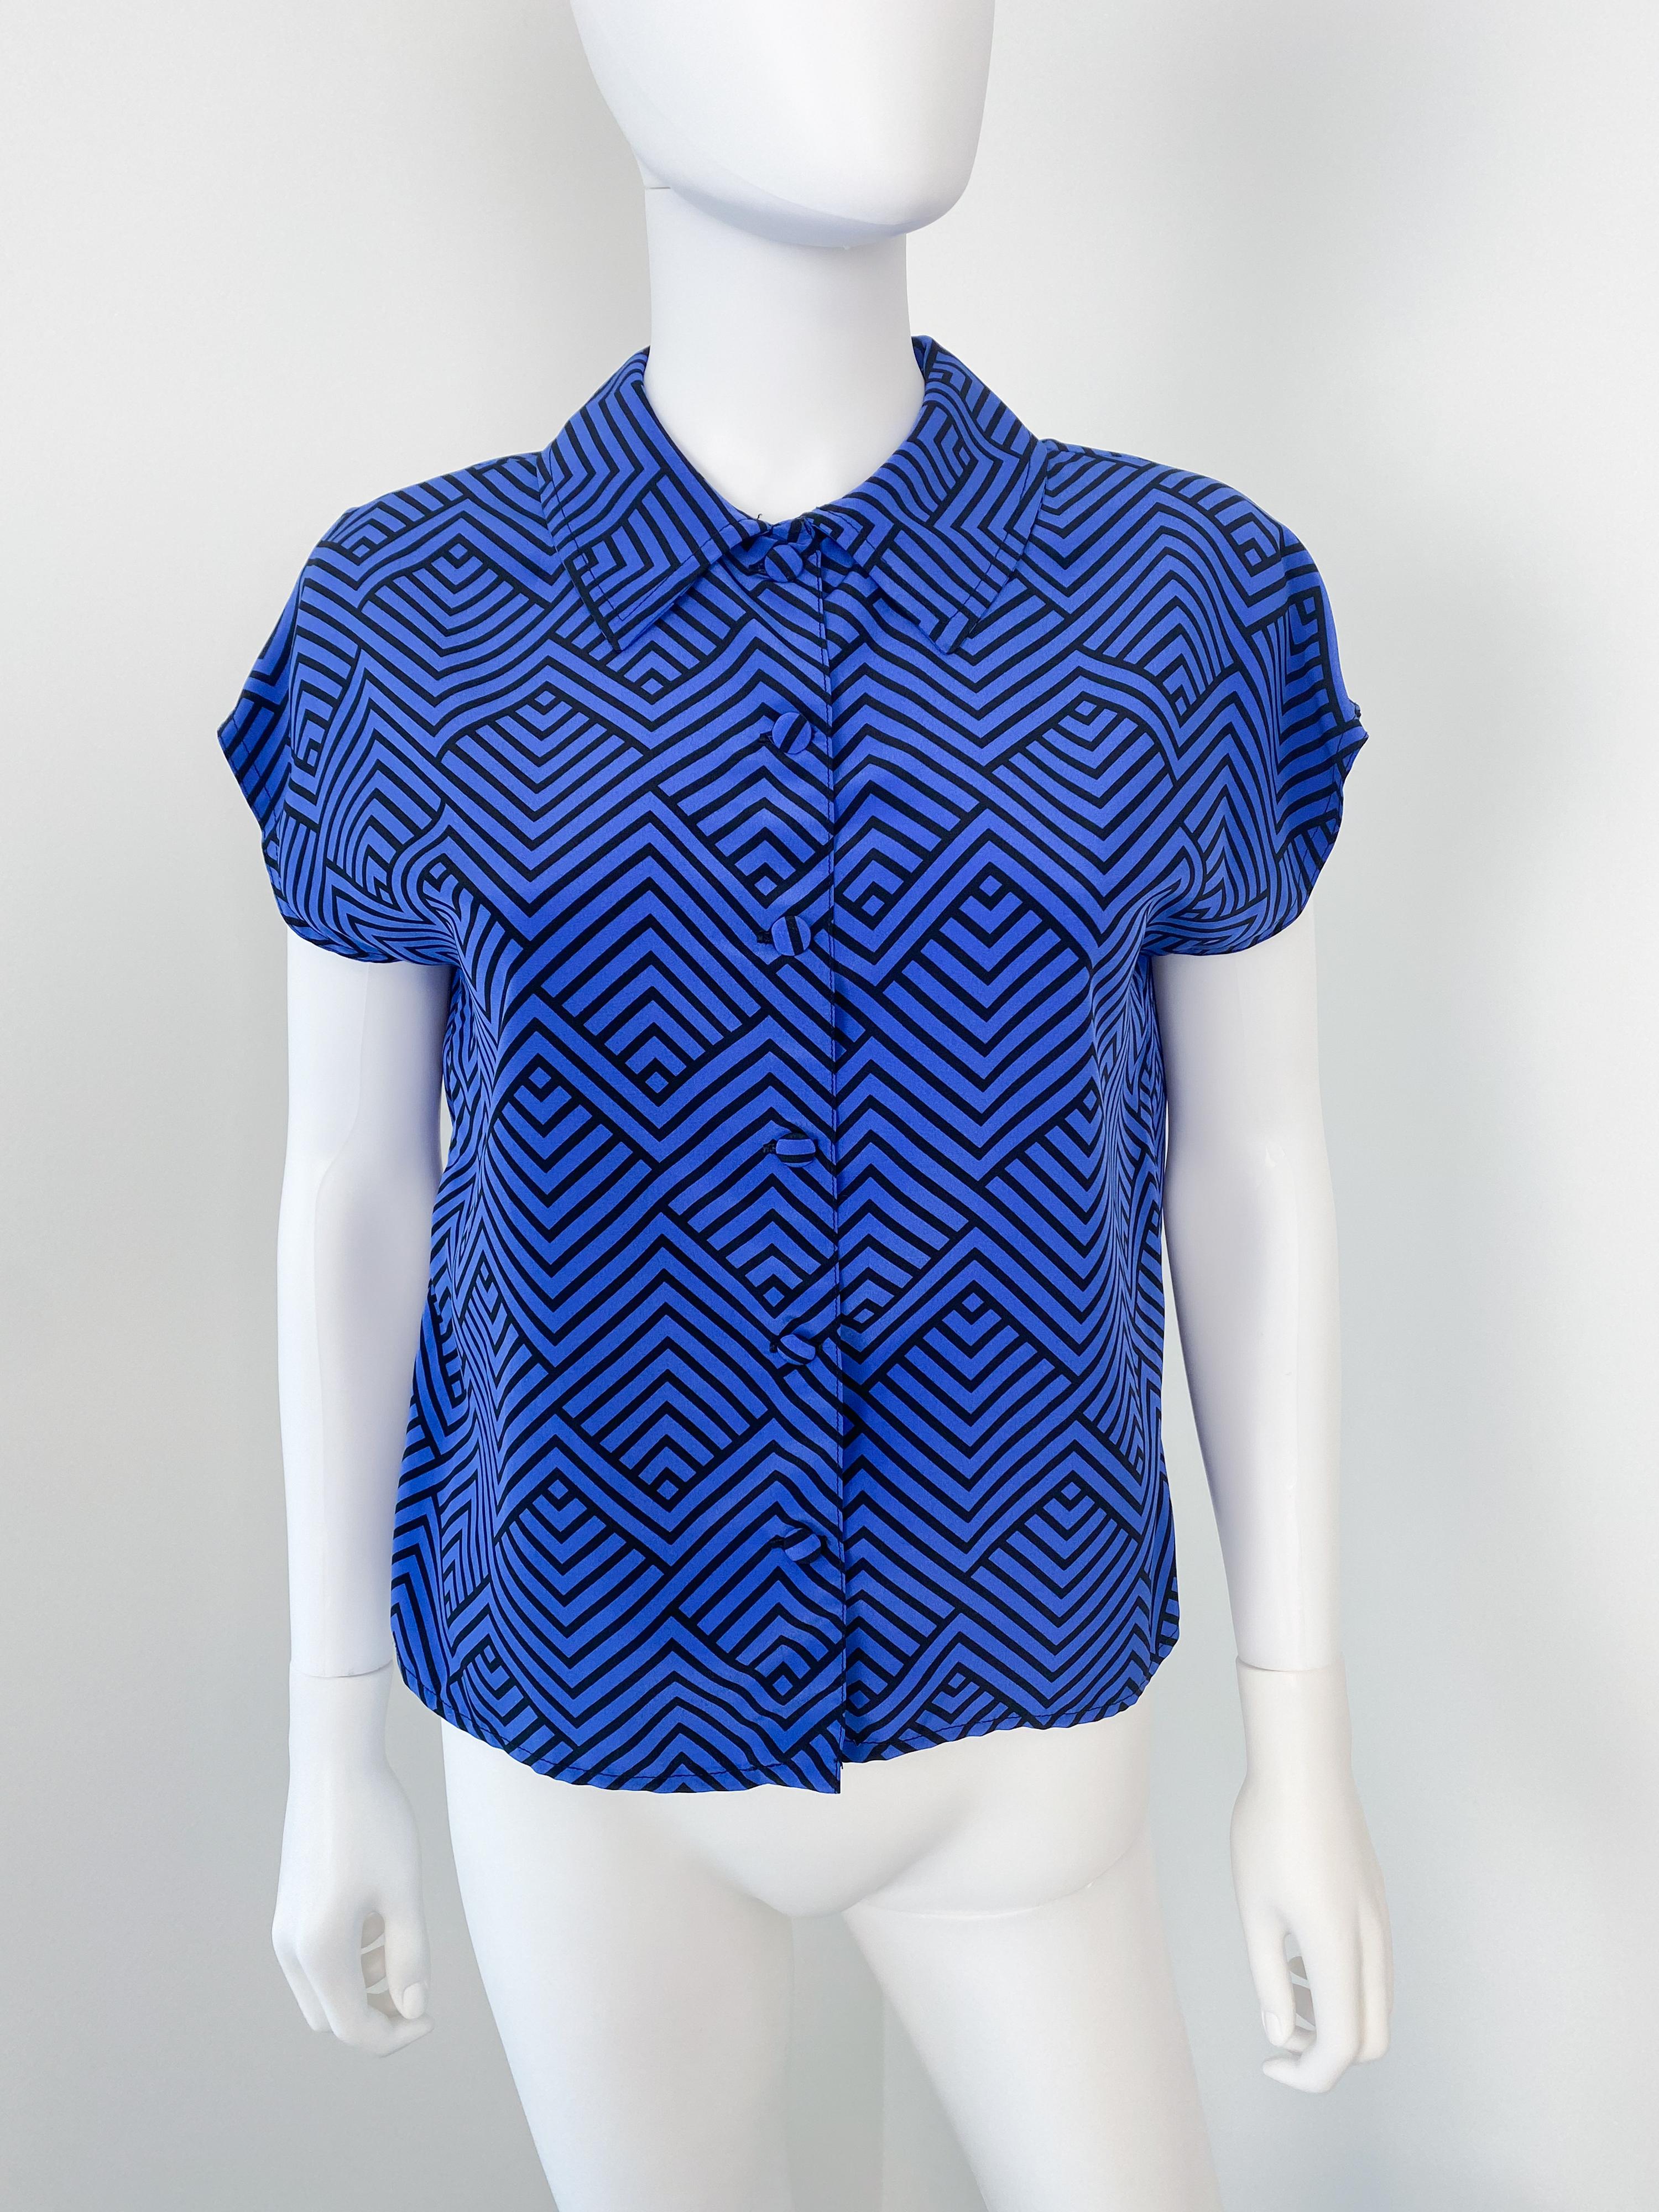 Wonderful vintage 1980s silky polyester pussy bow blouse with original tie. Electric blue and black color fabric with a zig-zag pattern. 
Short sleeves.

Brand: Unknown
Model: Polyester shirt
Material: polyester, synthetic (estimate)
Dominant Color: